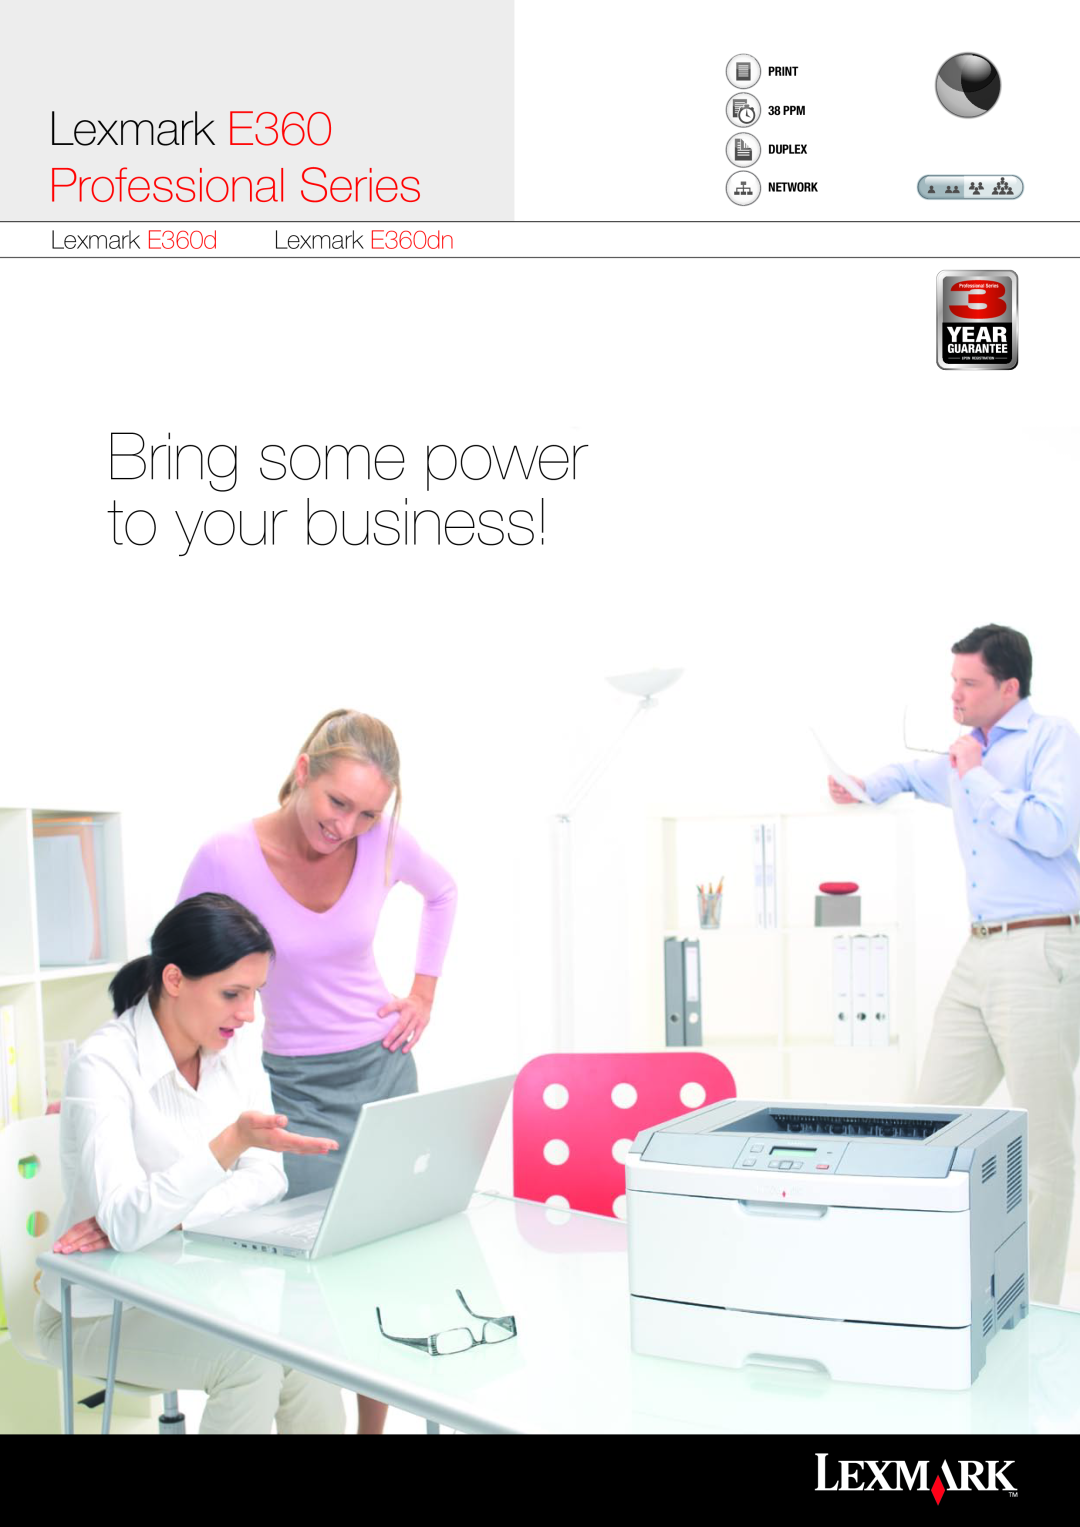 Lexmark E360D manual Bring some power to your business, Professional Series, Lexmark E360dn 